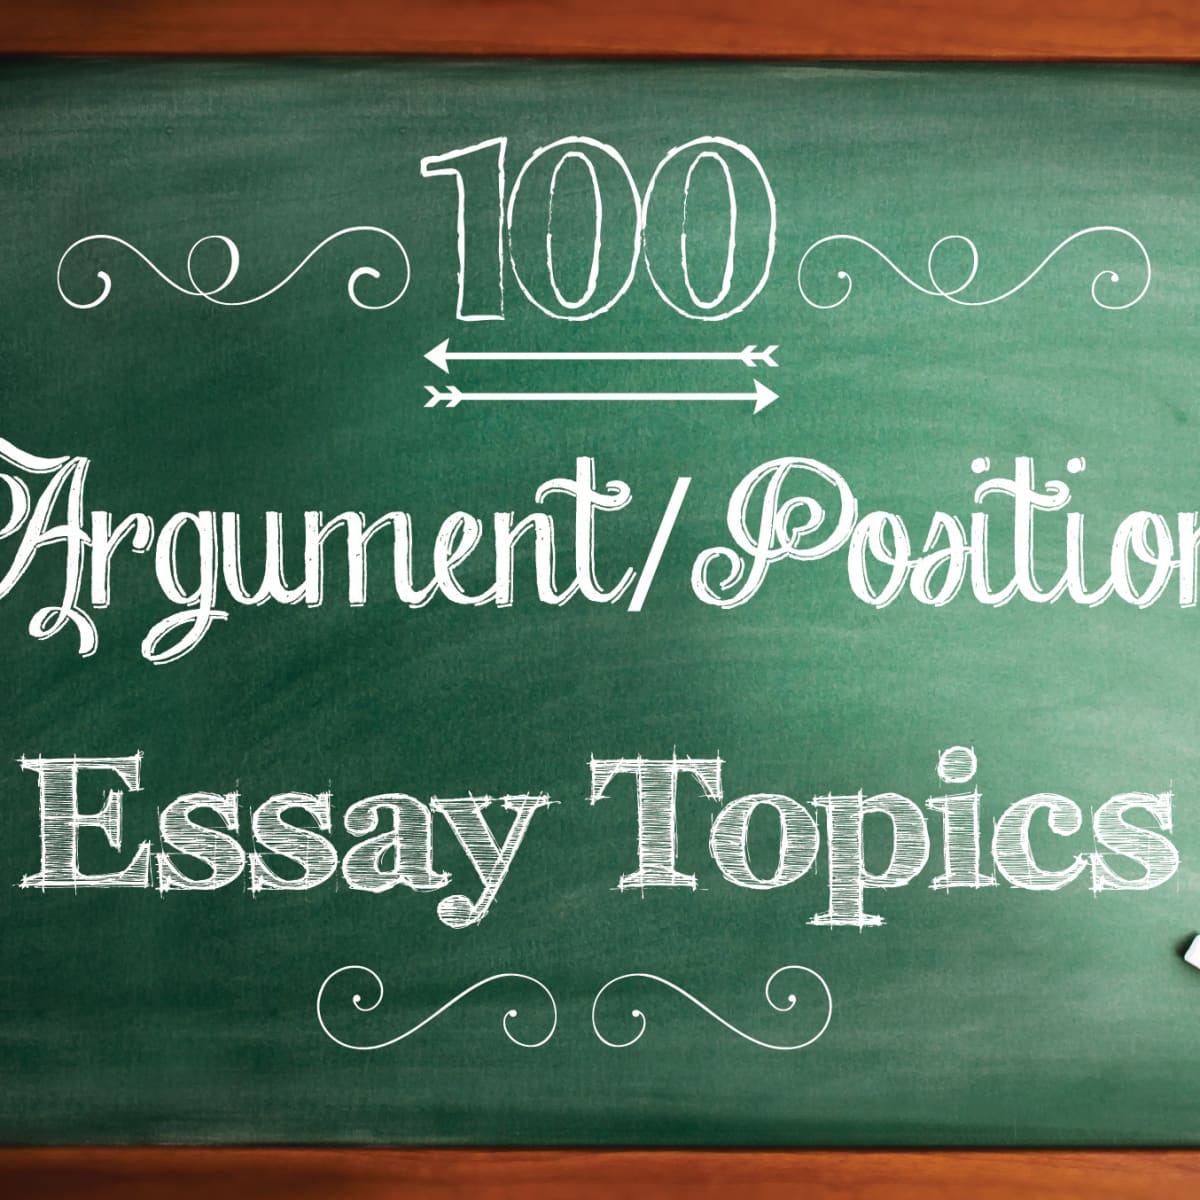 proposal essay topics for college students